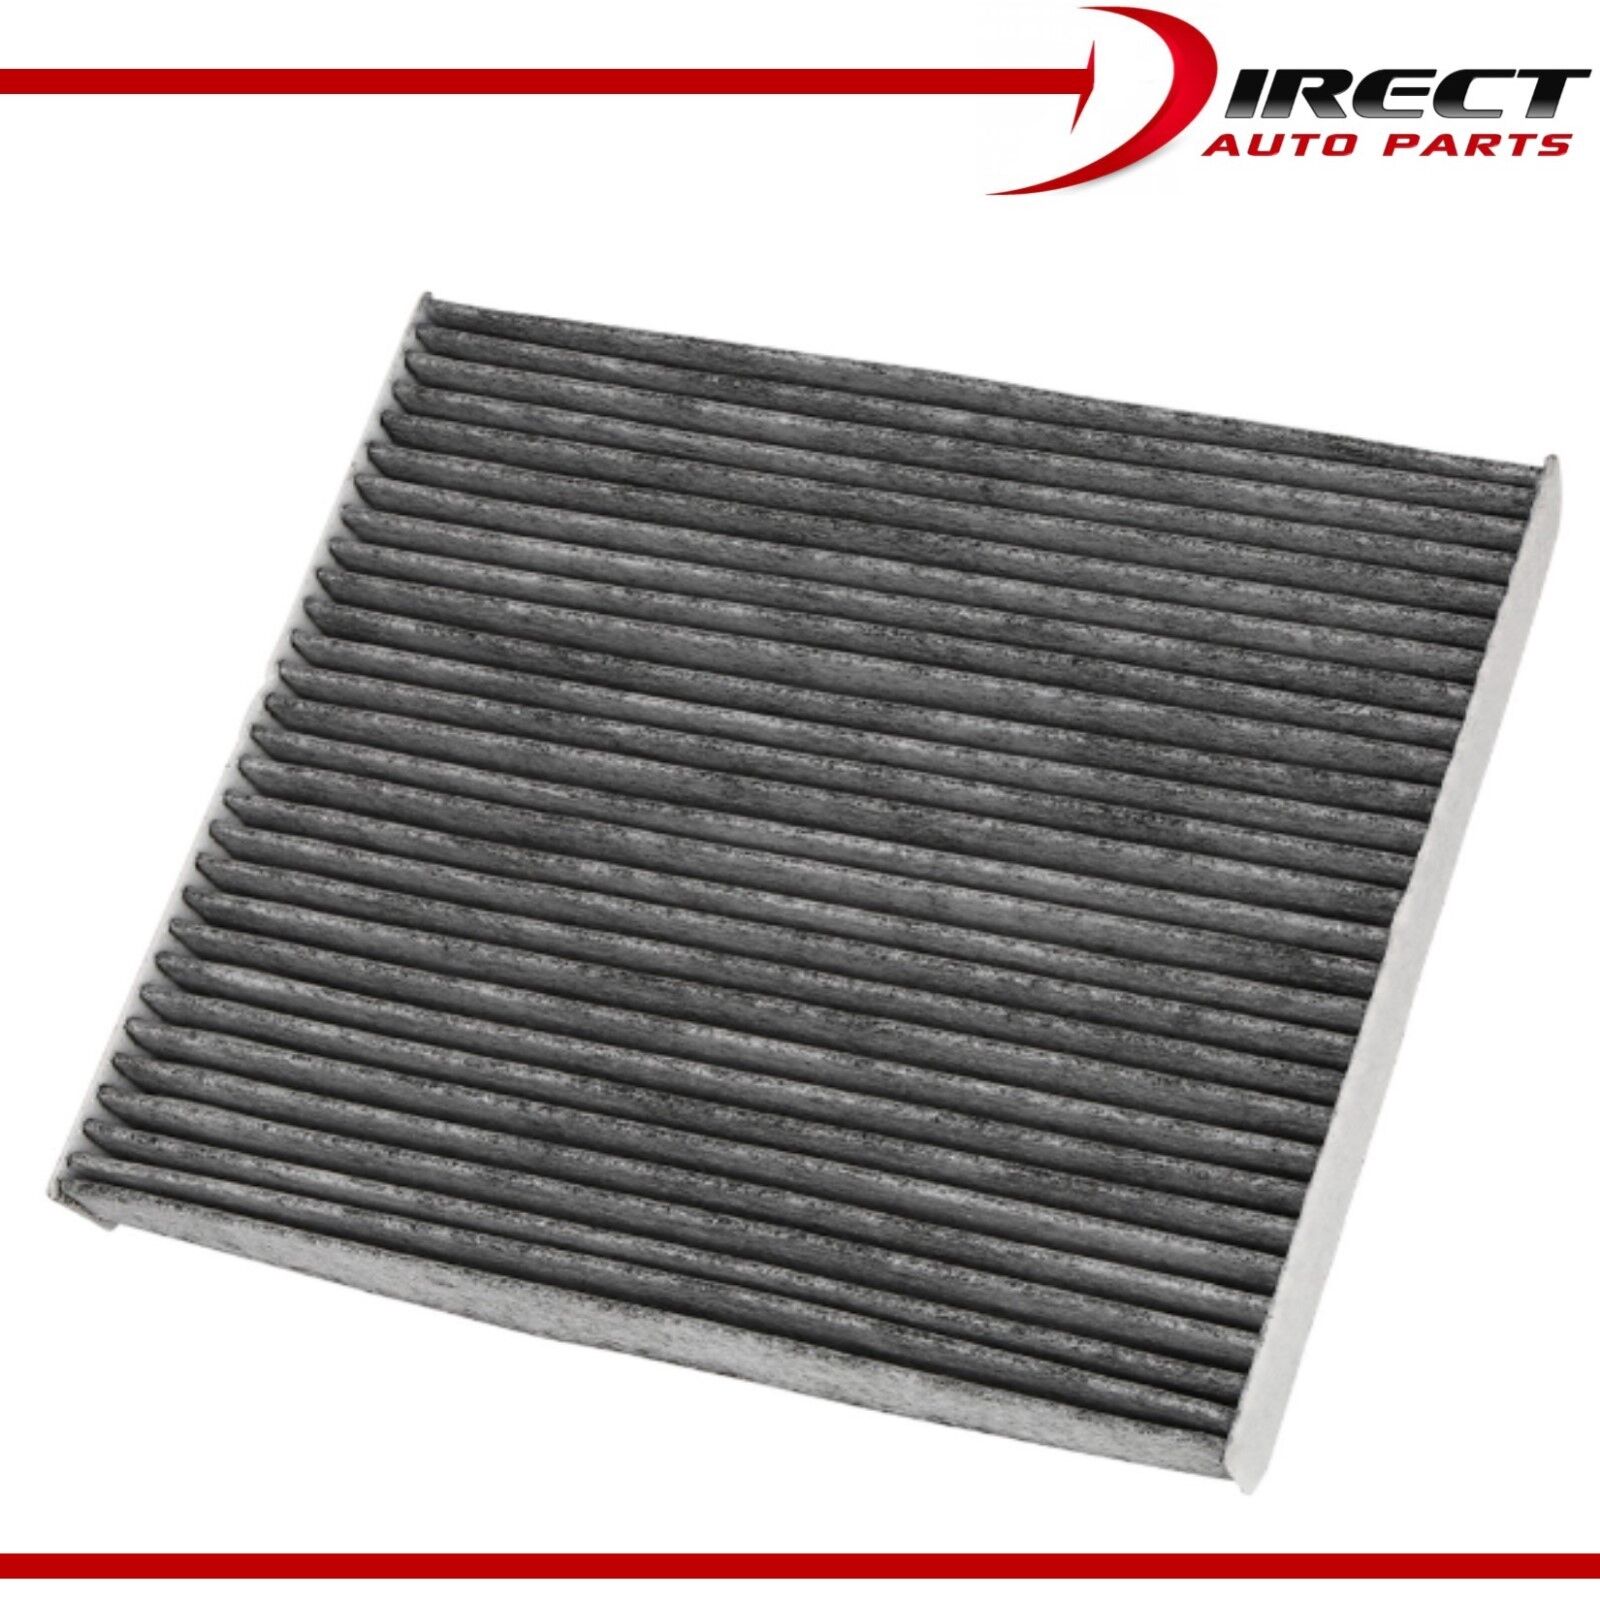 C25851 CARBONIZED CABIN AIR FILTER FOR TOYOTA OE# 87139-YZZ08  87139-YZZ10